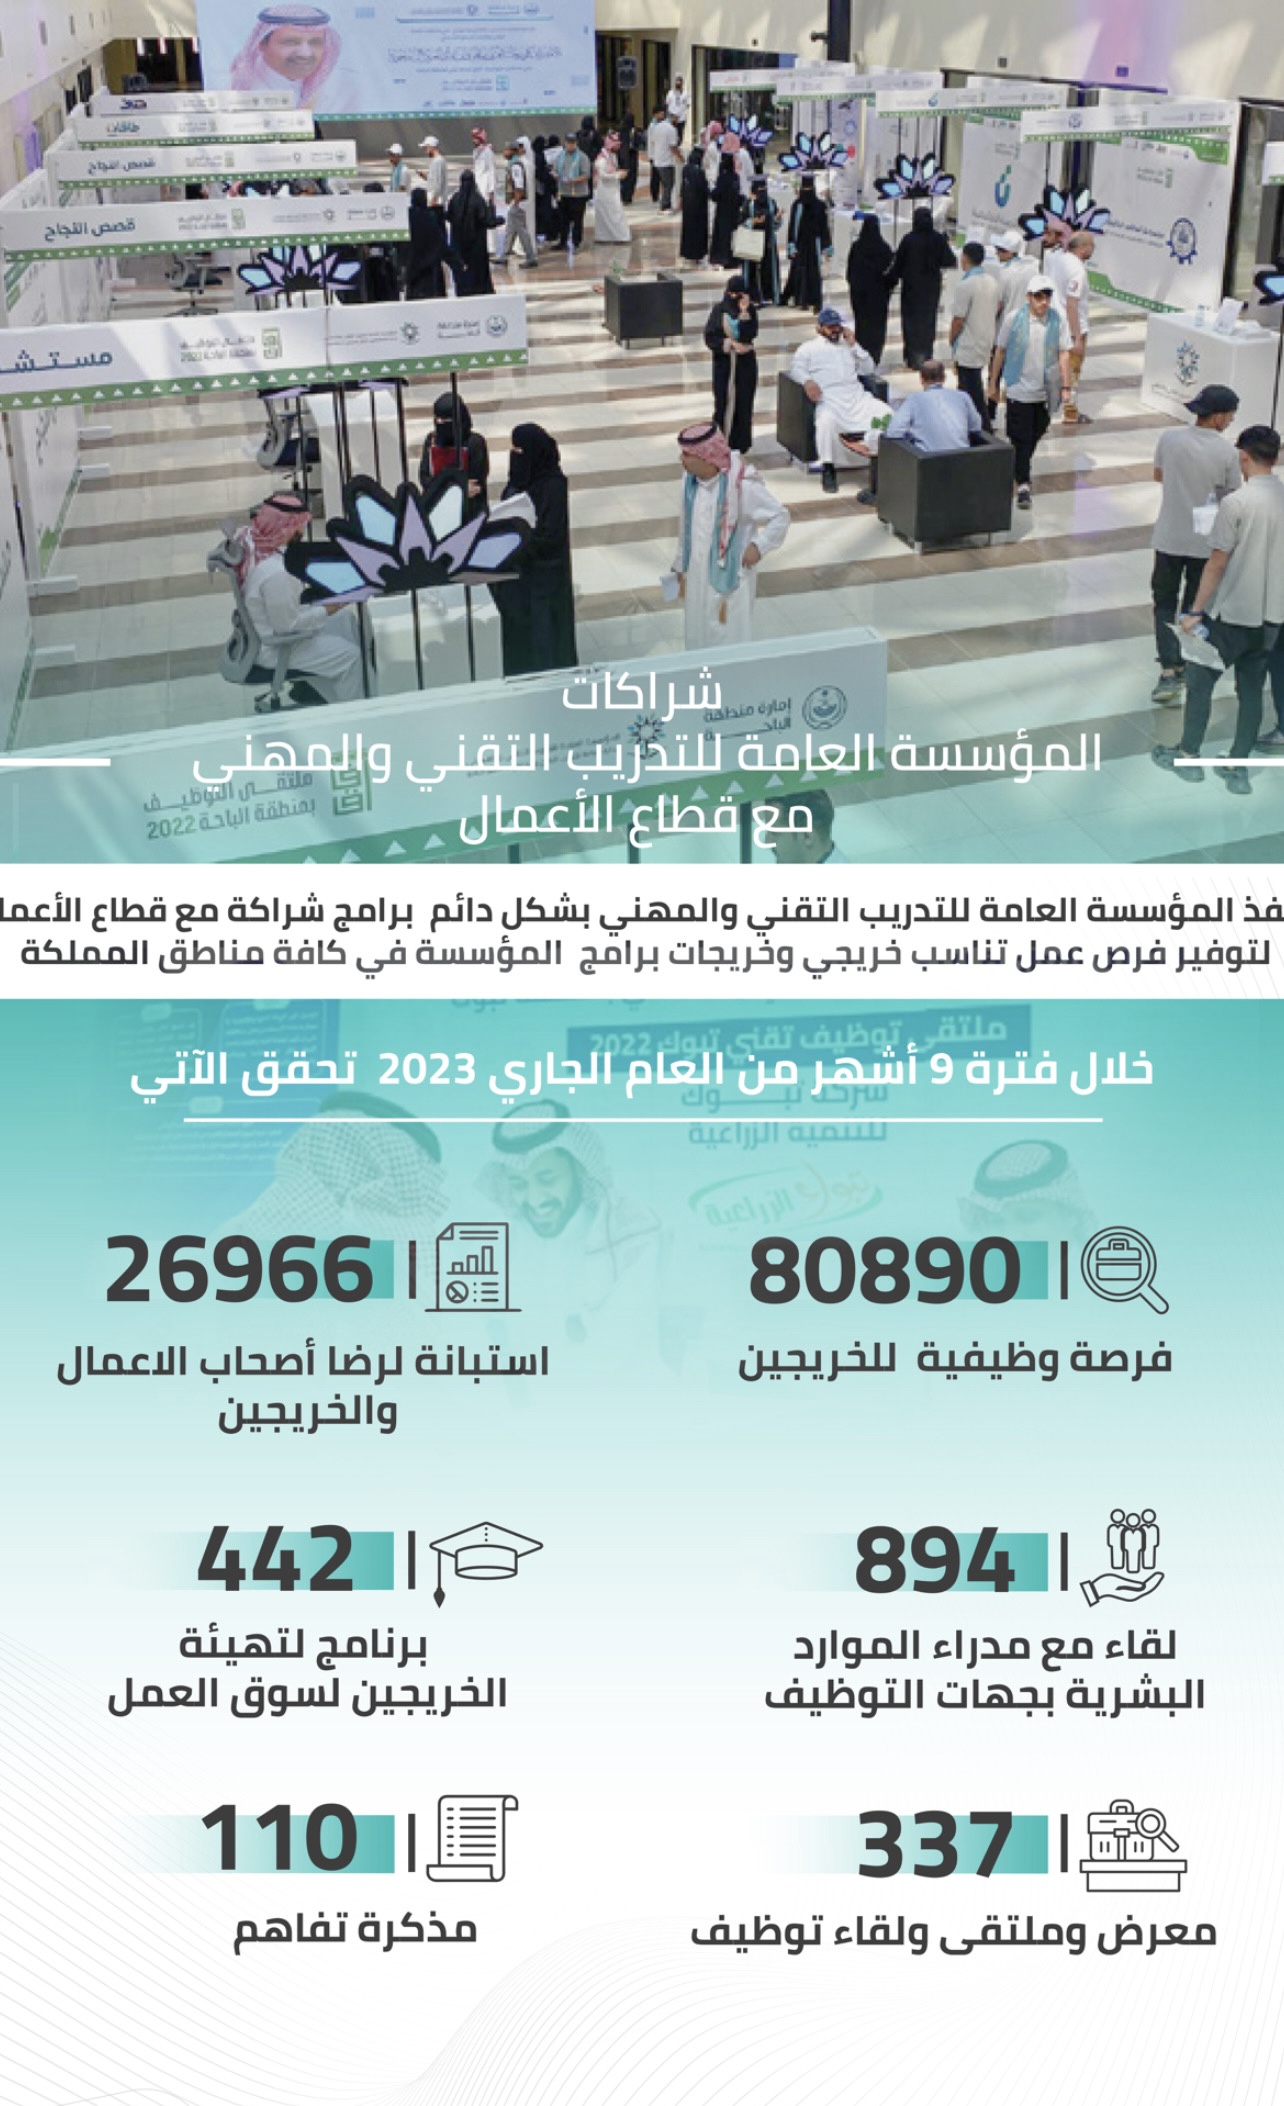 "Technical Training" Provides More Than (80) Thousand Job Opportunities for its Graduates within Nine Months